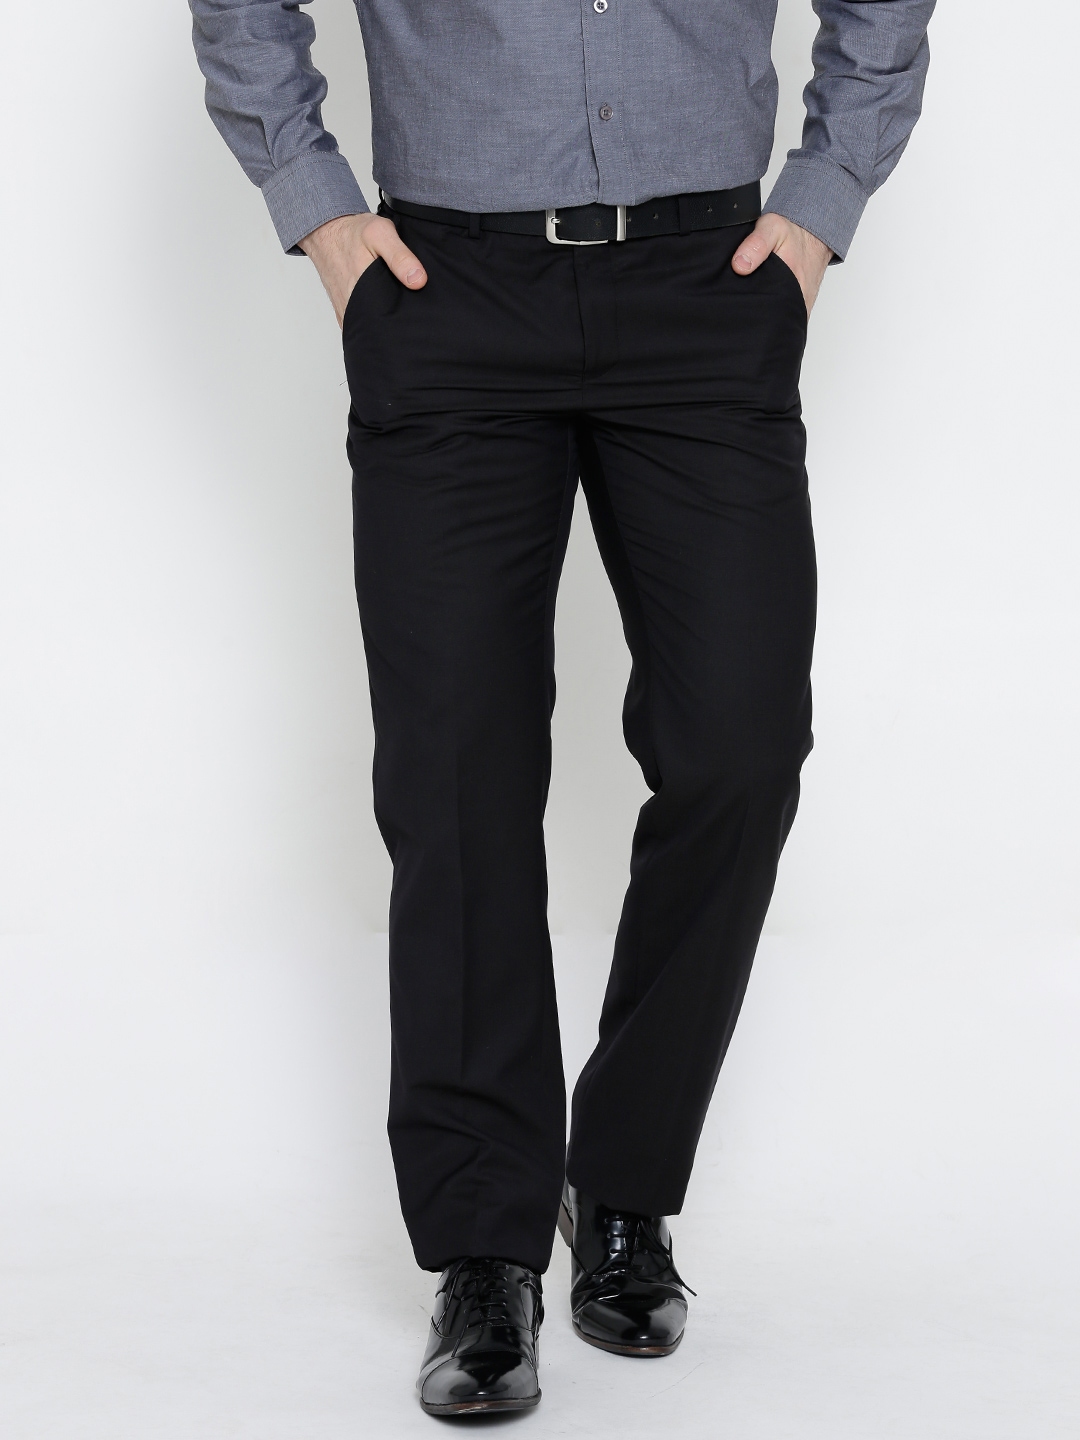 Textured Formal Trousers In Black B91 Cairon